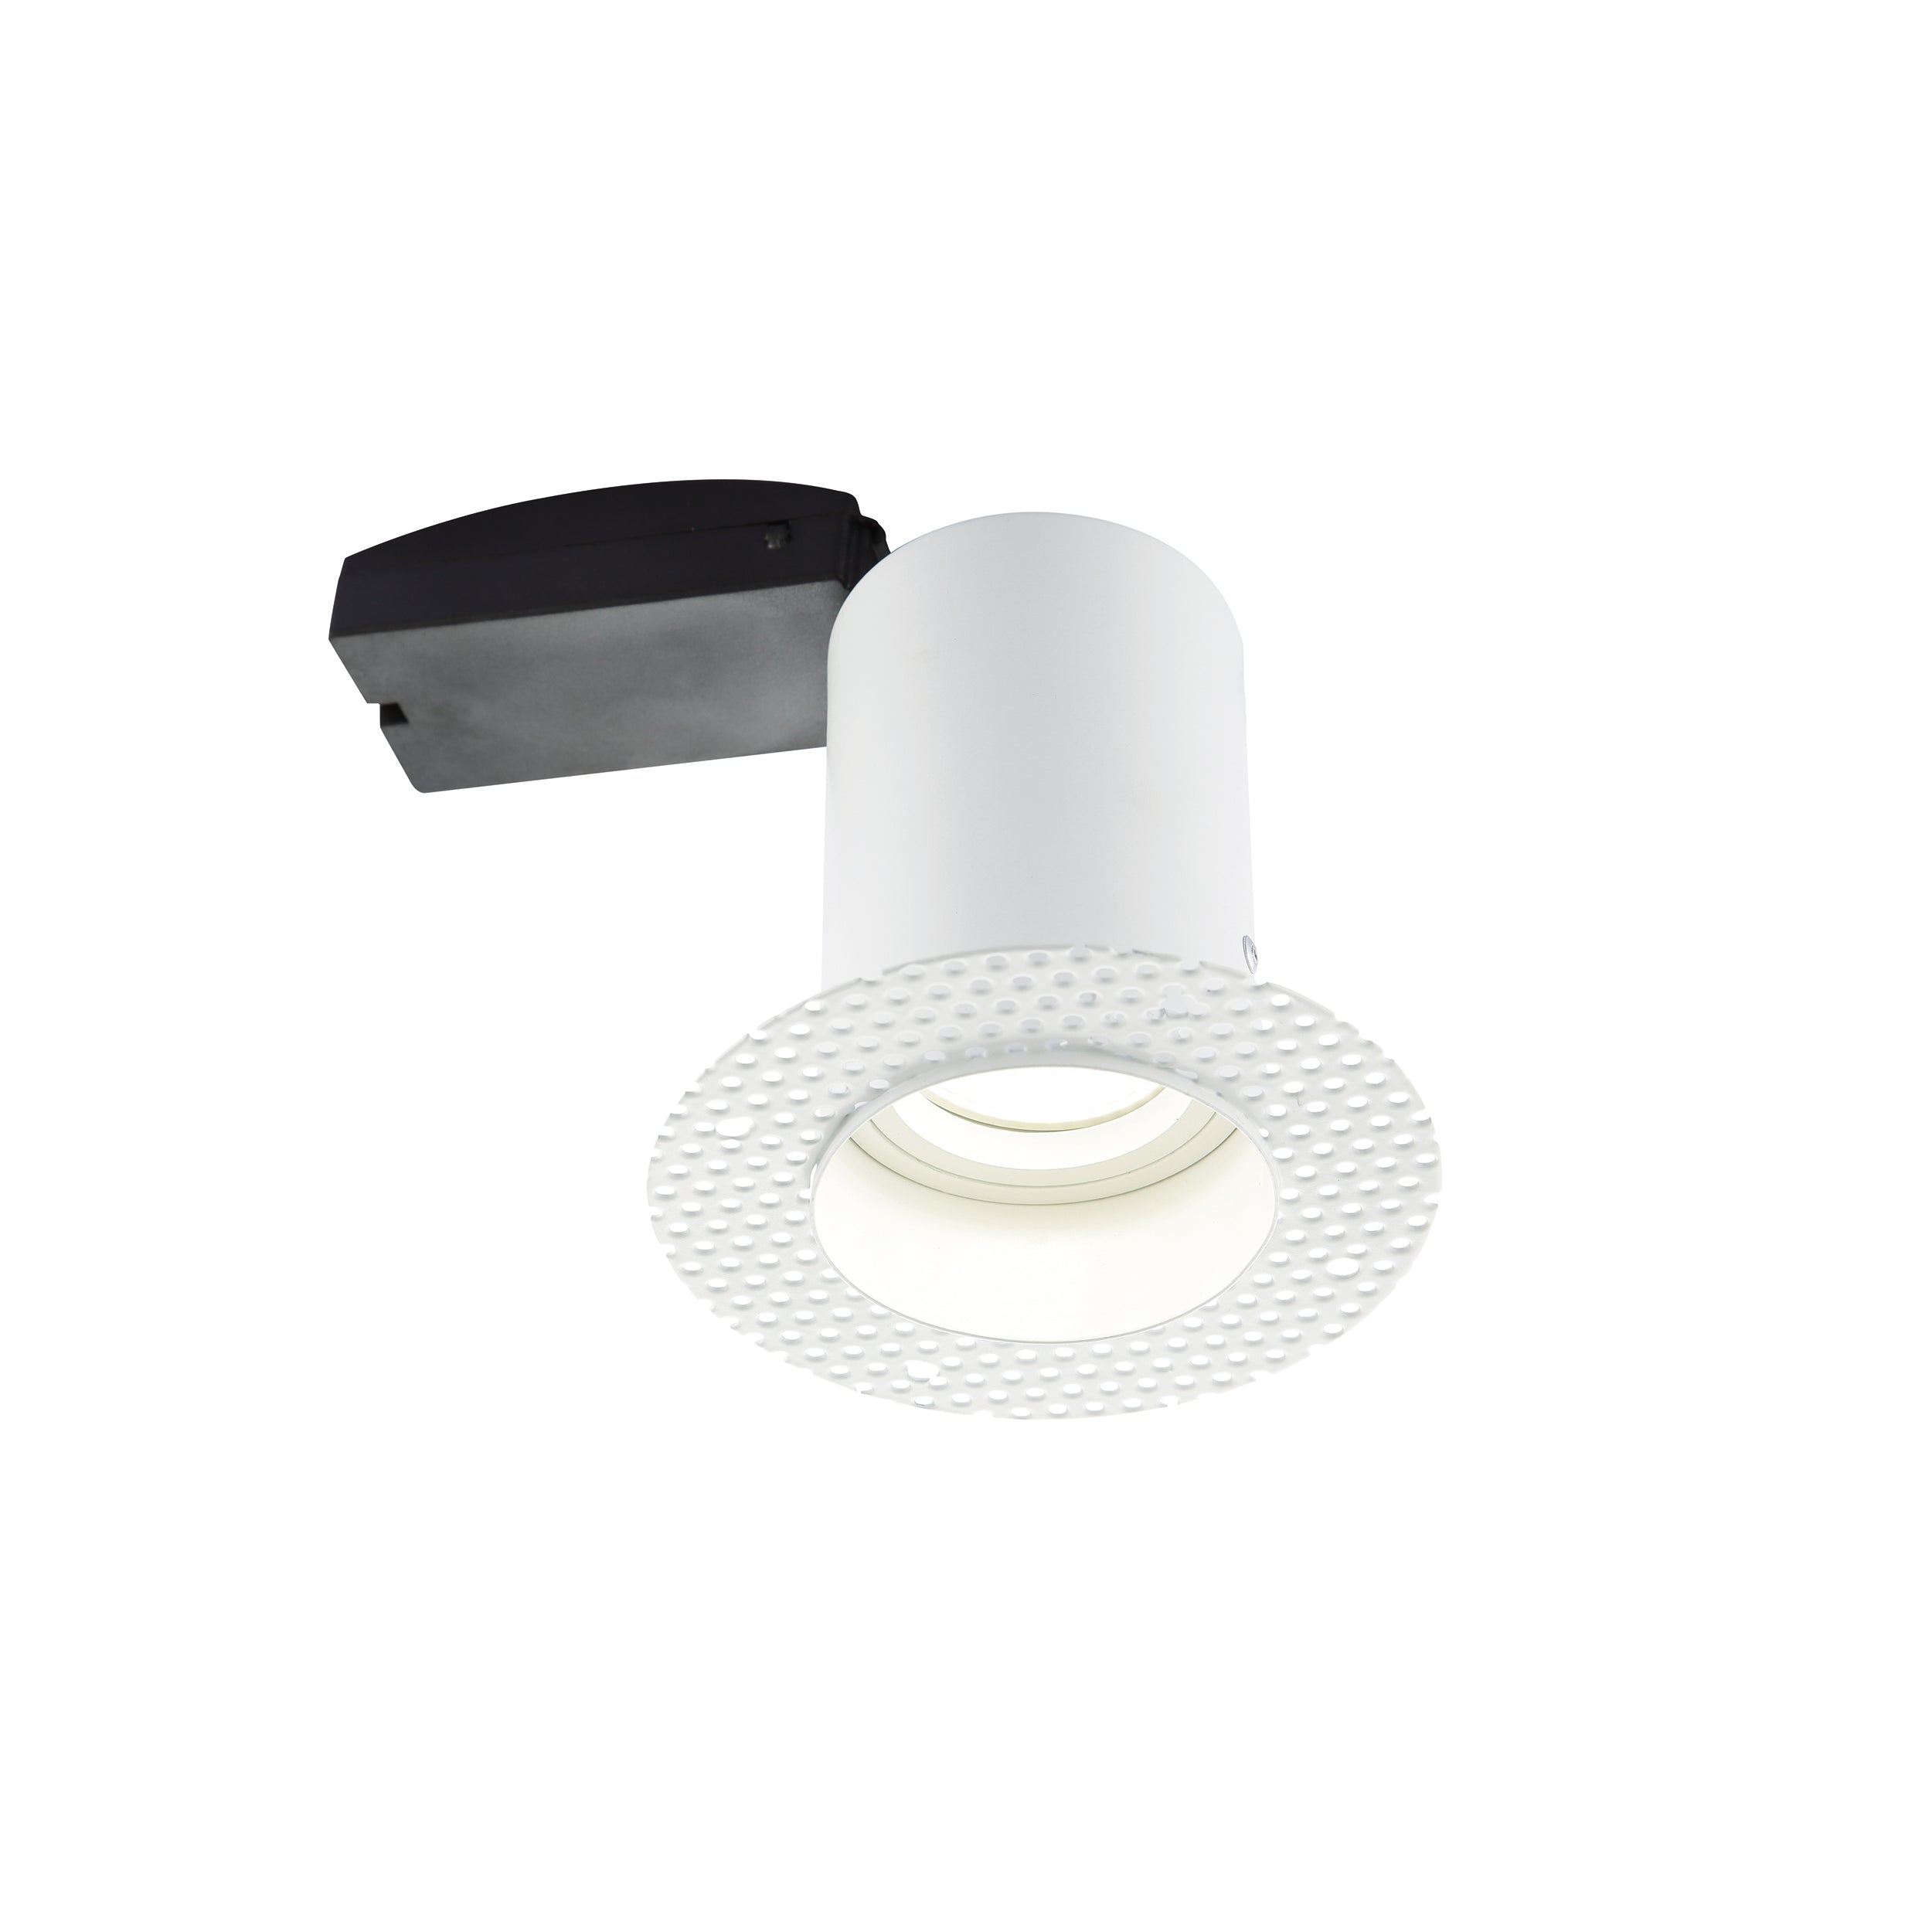 Saxby 81572 Ravel Trimless Plaster-in Fire Rated GU10 Downlight on